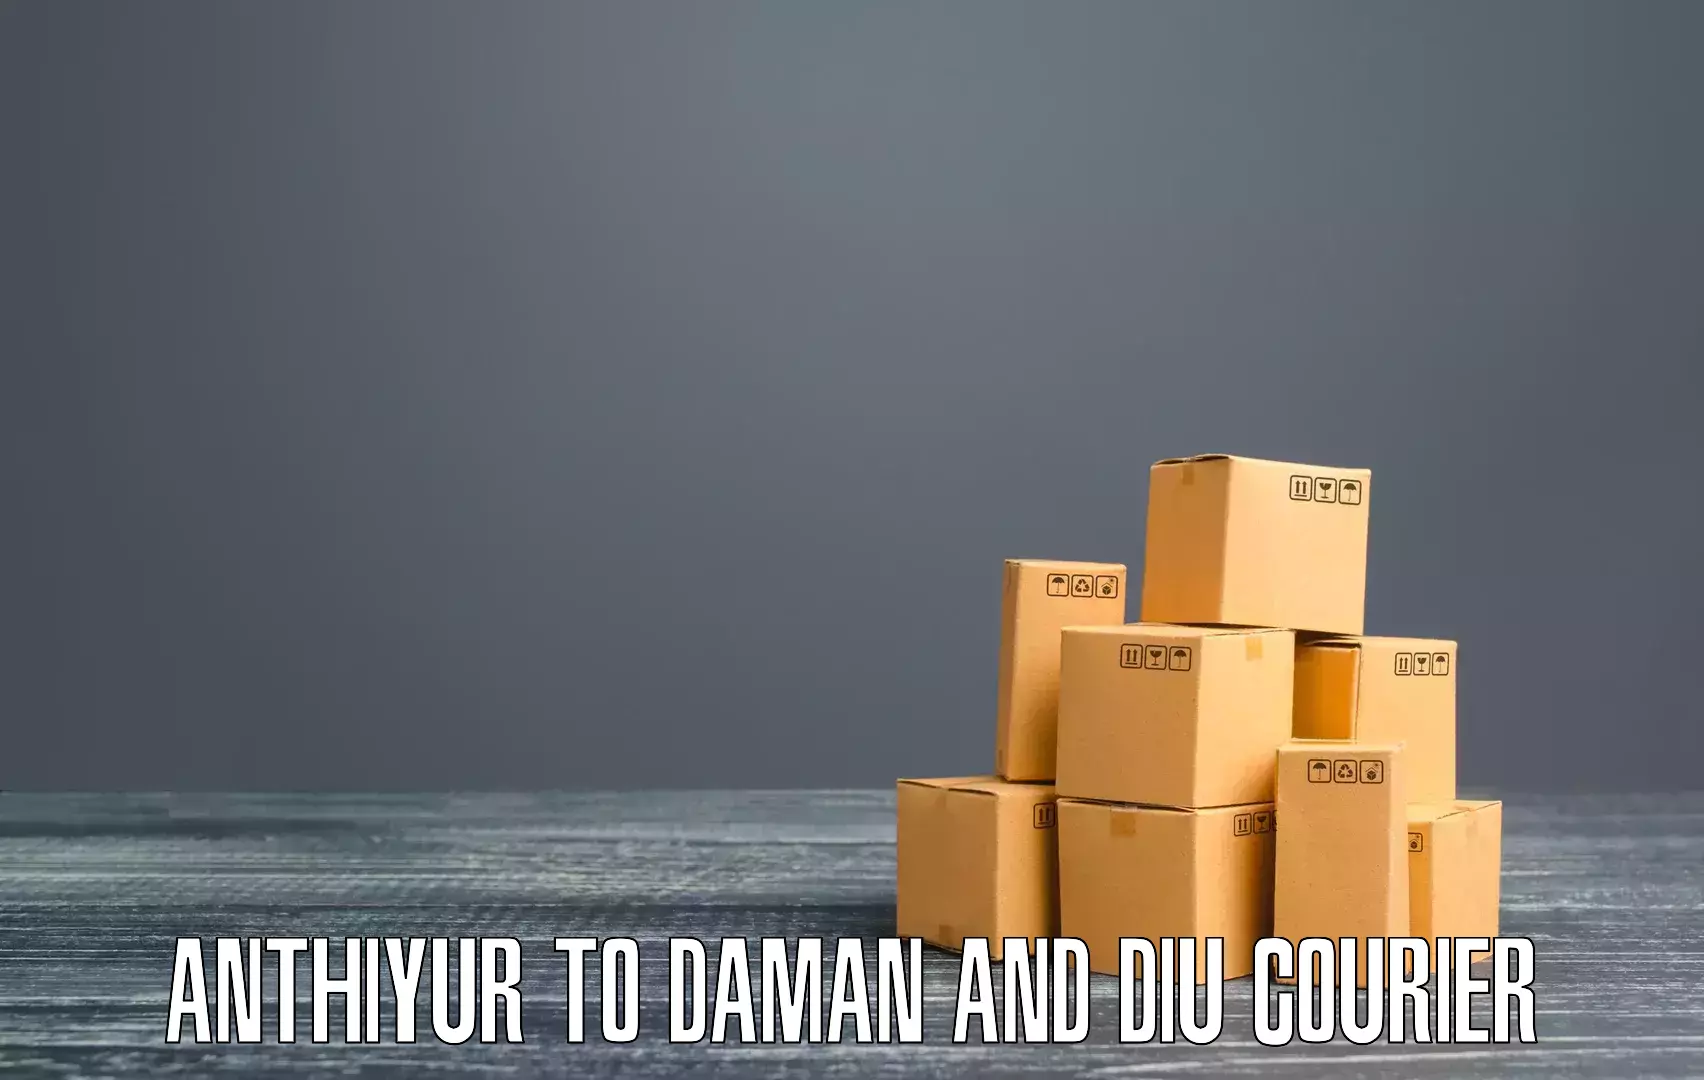 Cost-effective courier options Anthiyur to Daman